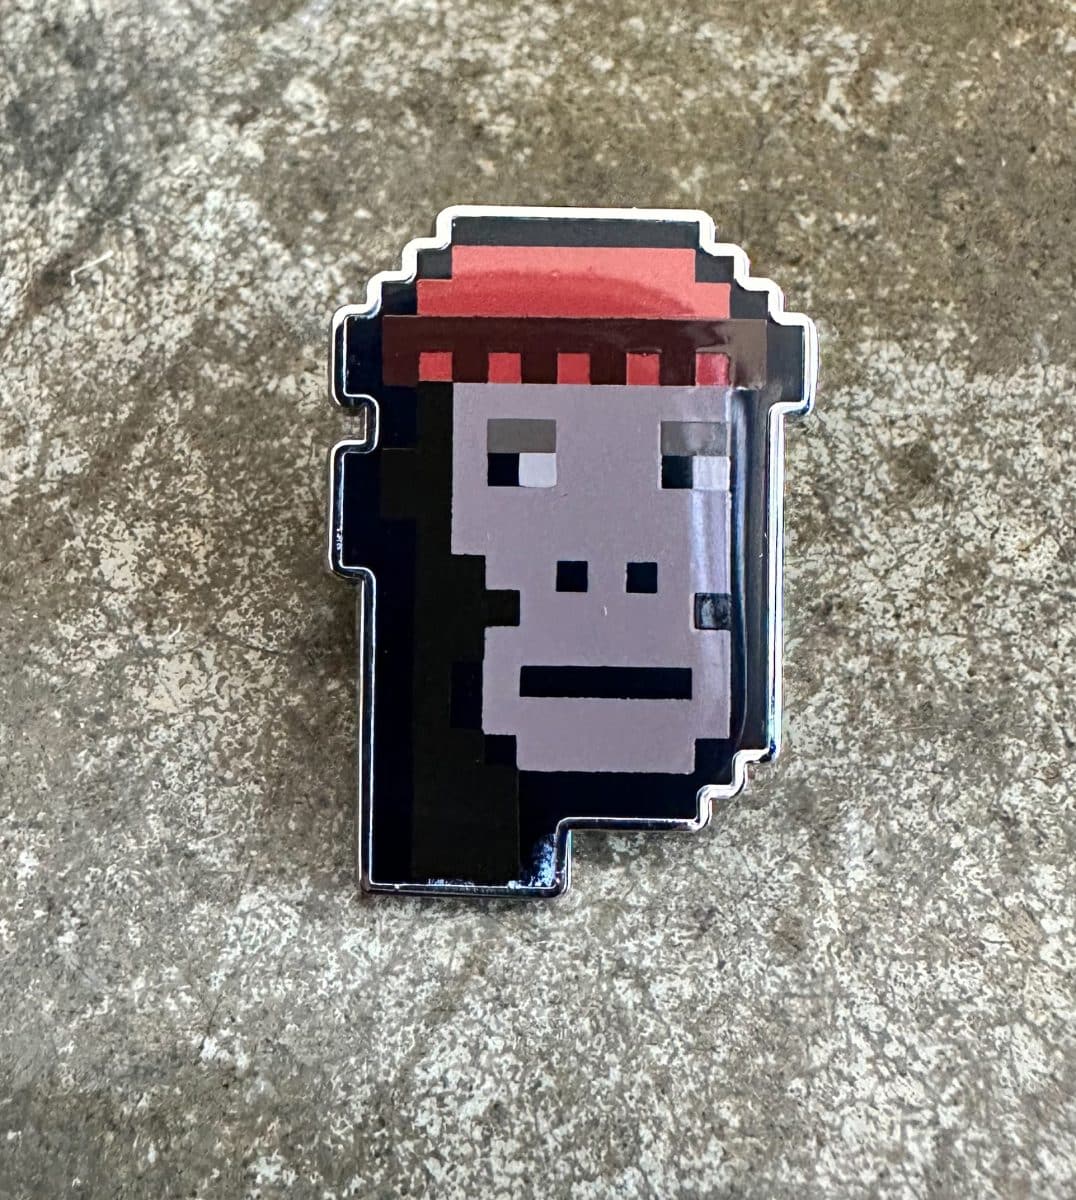 image of gmoney pin 0 a pixelated monkey face wearing a red beanie